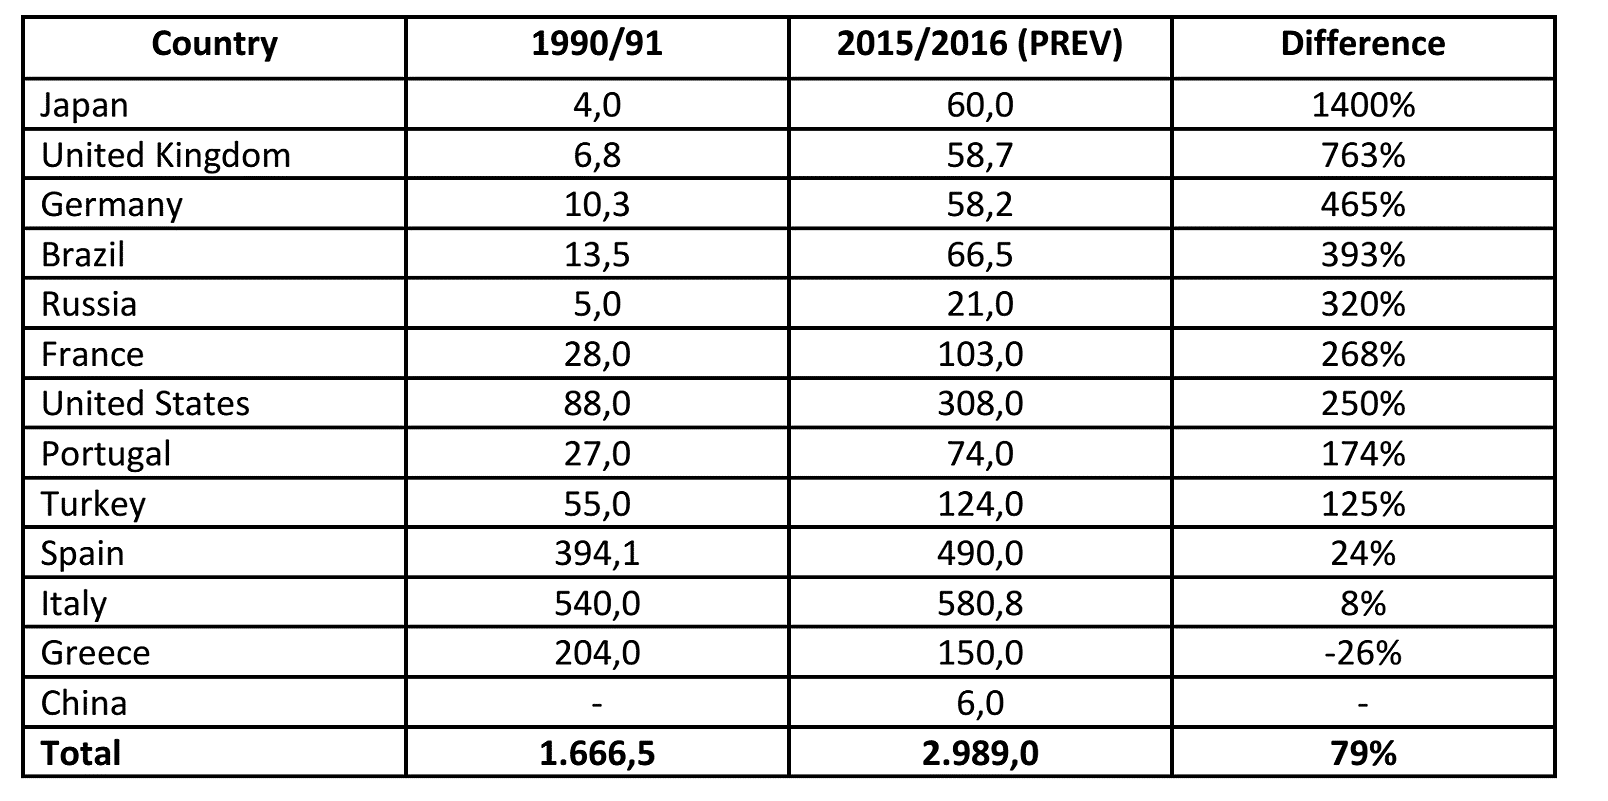 Table of Italian Olive Oil Exporters. Headings: Country, 1990/91, 2015/2016 (PREV), Difference, Japan, 4.0, 60.0, 1400%, United Kingdom, 6.8, 58.7, 763%, Germany, 10.3, 58.2, 465%, Brazil, 13.5, 66.5, 393%, Russia, 5.0, 21.0, 320%, France, 28.0, 103.0, 268%, United States, 88.0, 308.0, 250%, Portugal, 27.0, 74.0, 174%, Turkey, 55.0, 124.0, 125%, Spain, 394.1, 490.0, 24%, Italy, 540.0, 580.8, 8%, Greece, 204.0, 150.0, -26%, China, Blank, 6.0, Blank, Total, 1666.5, 2989.0, 79%